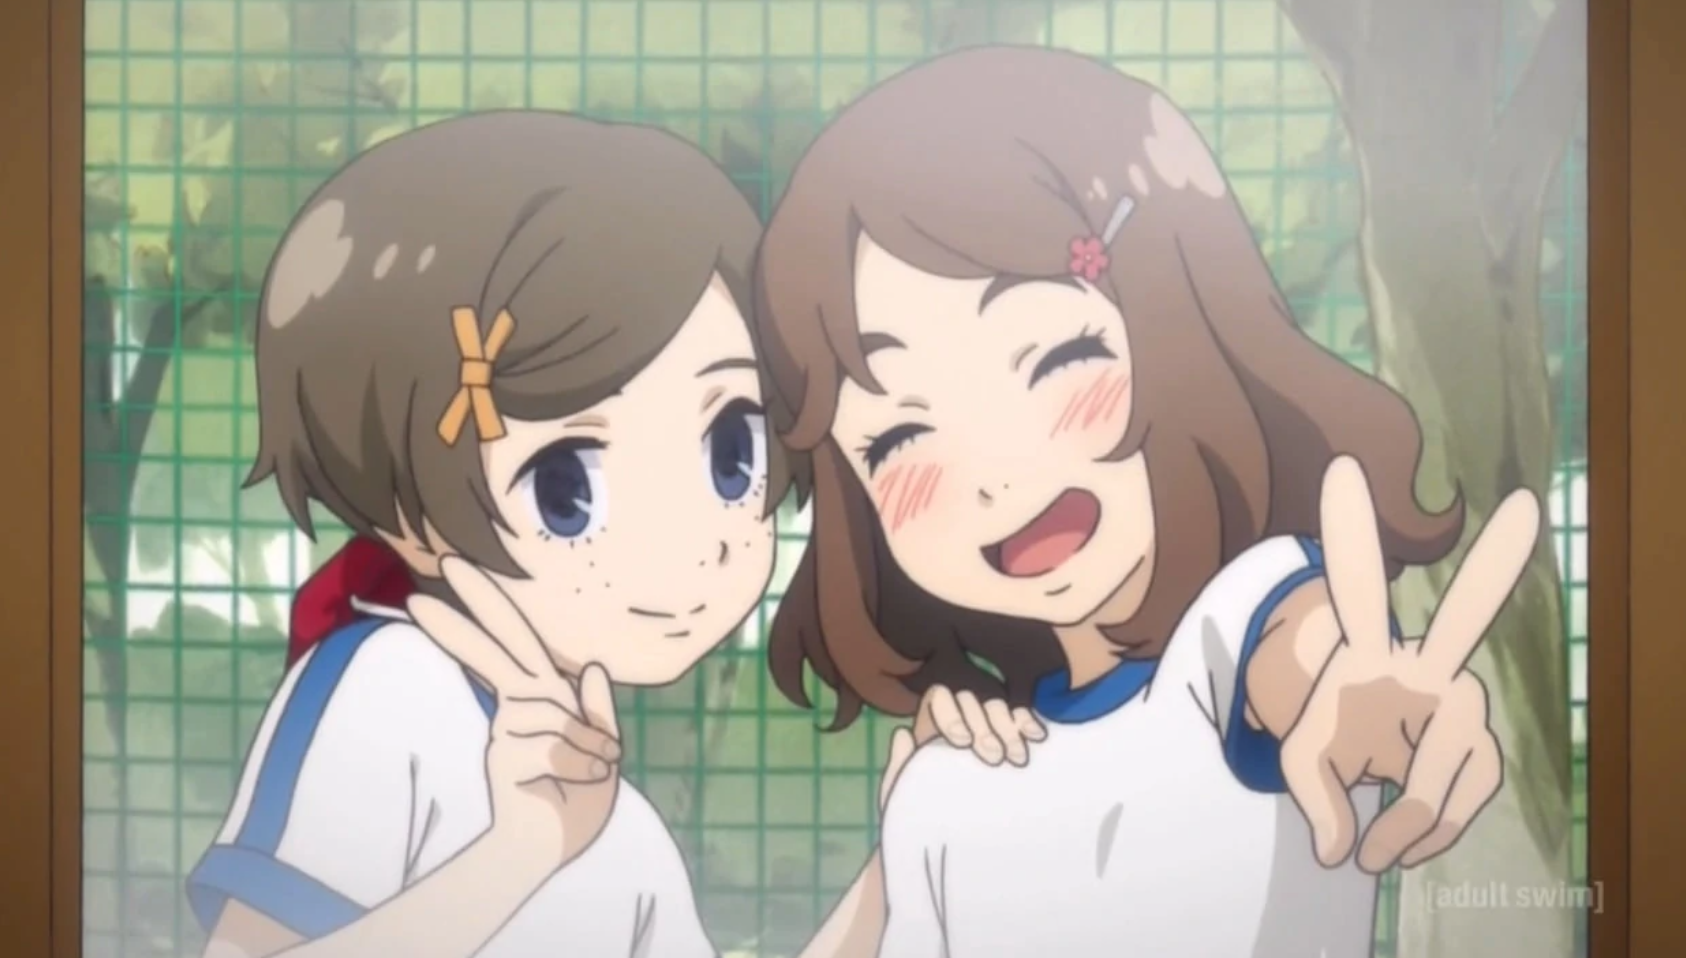 FLCL Alternative, Episode 5: Kana and Pets as kids from a photo in Pets' room.